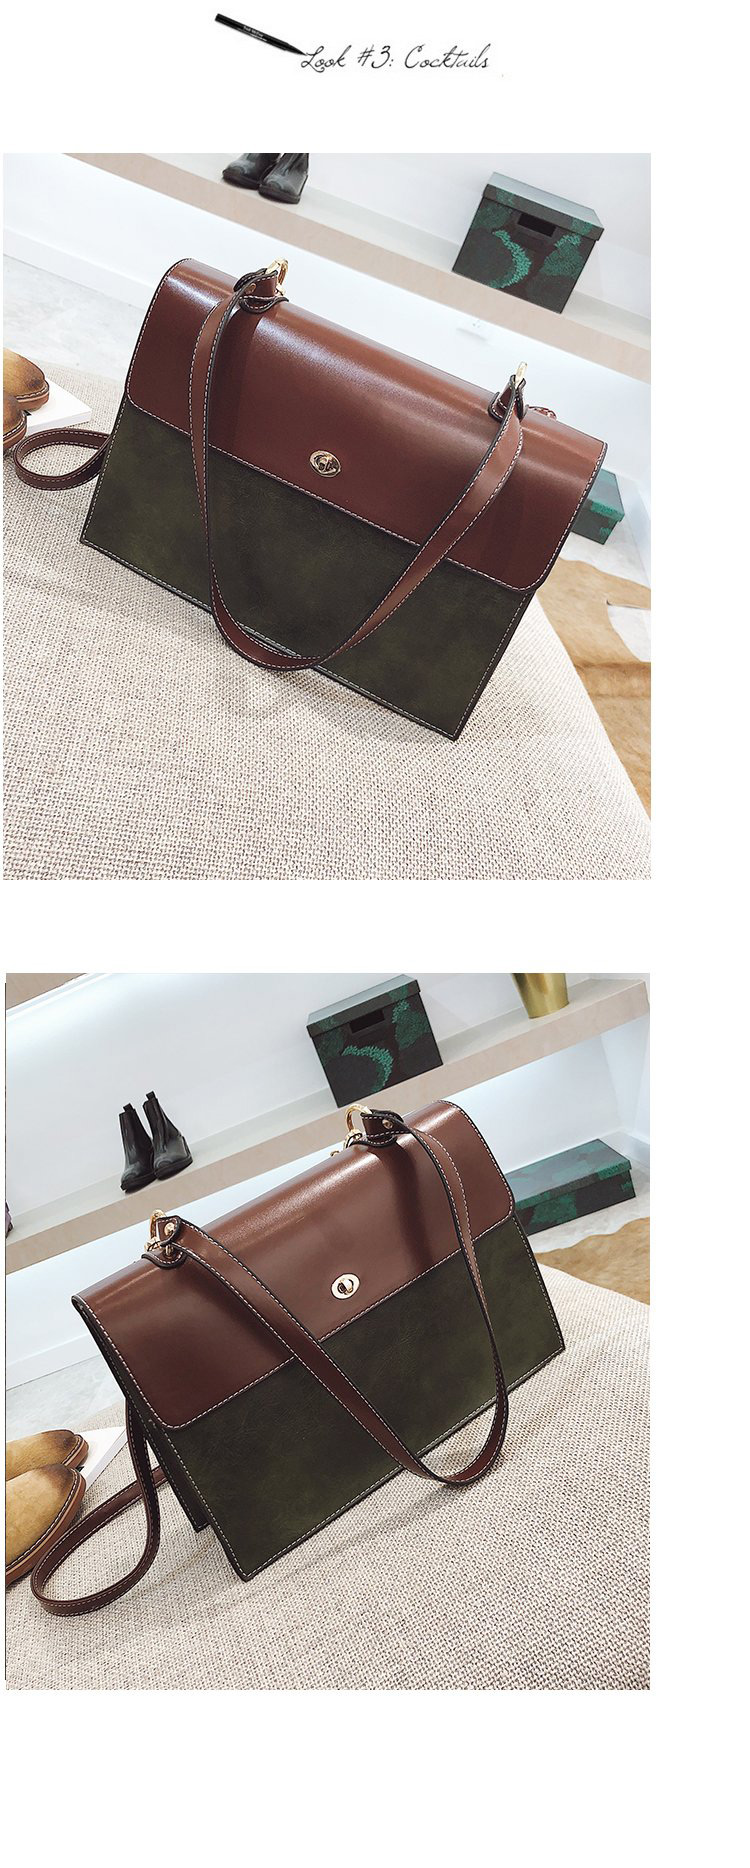 Fashion Green Square Shape Decorated Bag,Messenger bags